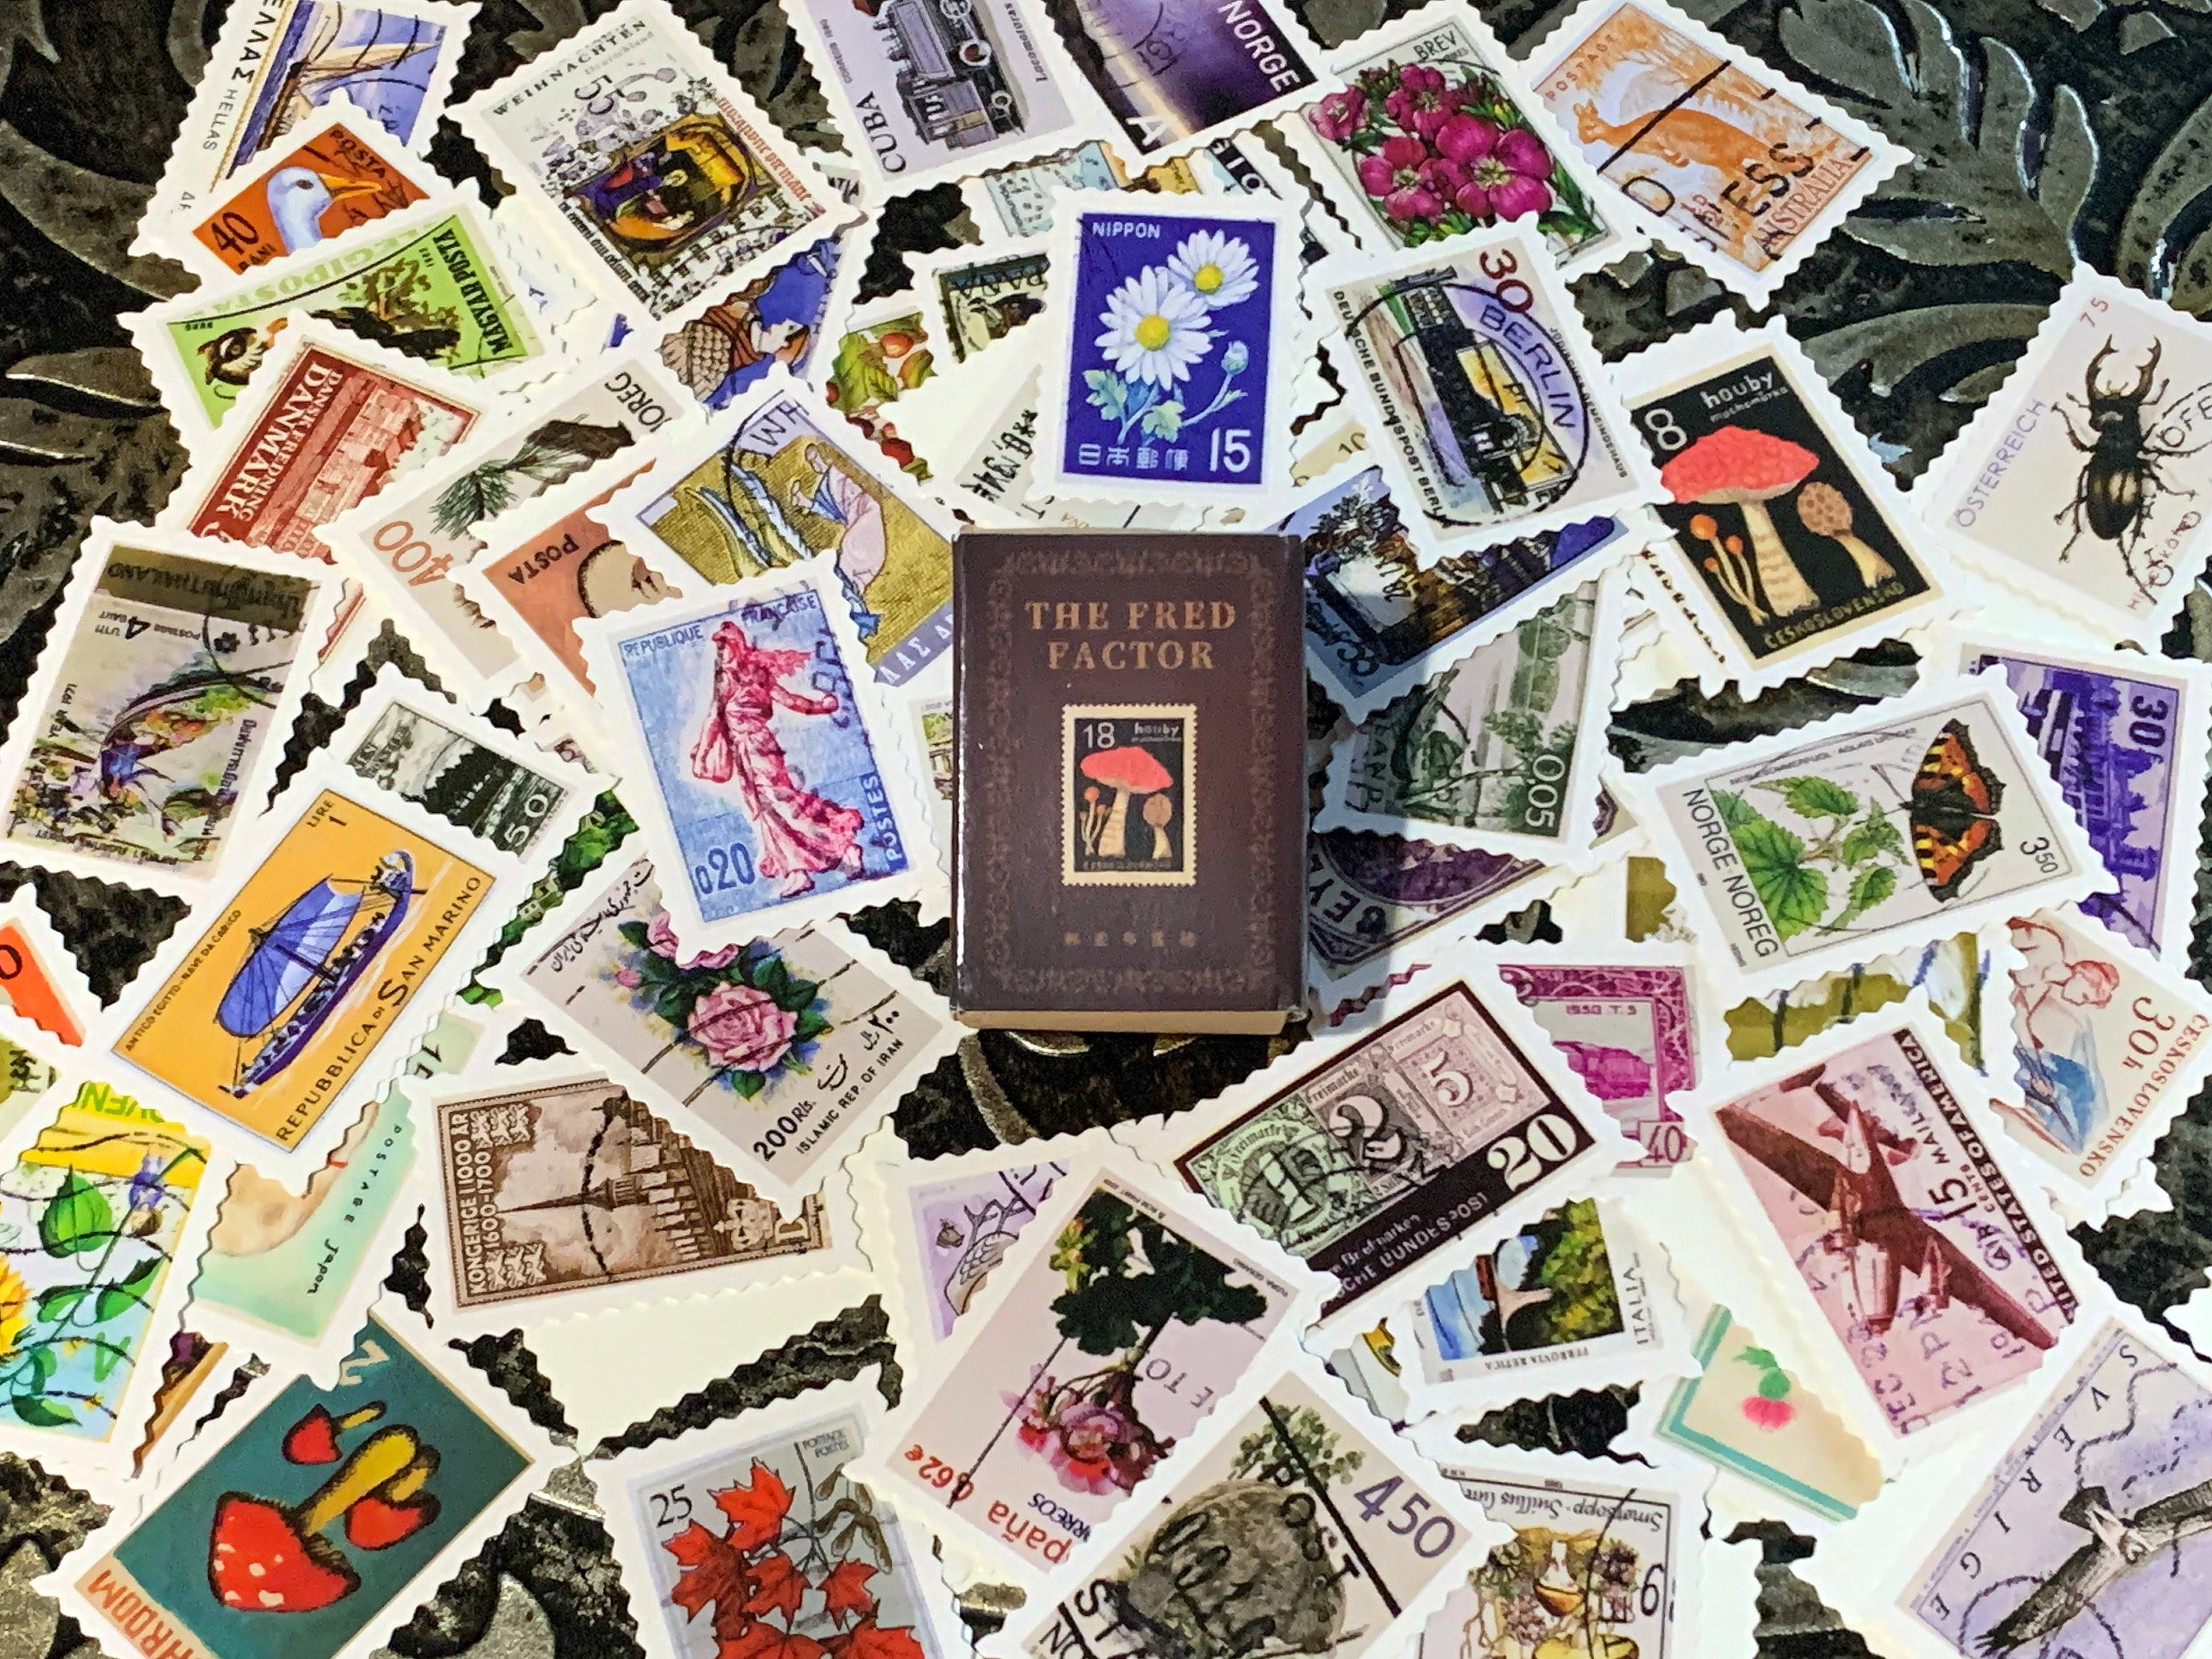 100 Mini Cards, Ideal for Scrapbooking Projects, Various Subjects, Ex Libris, Angels, Fairies, Stamps, Victorian Posters, 1.9in x 1.3in